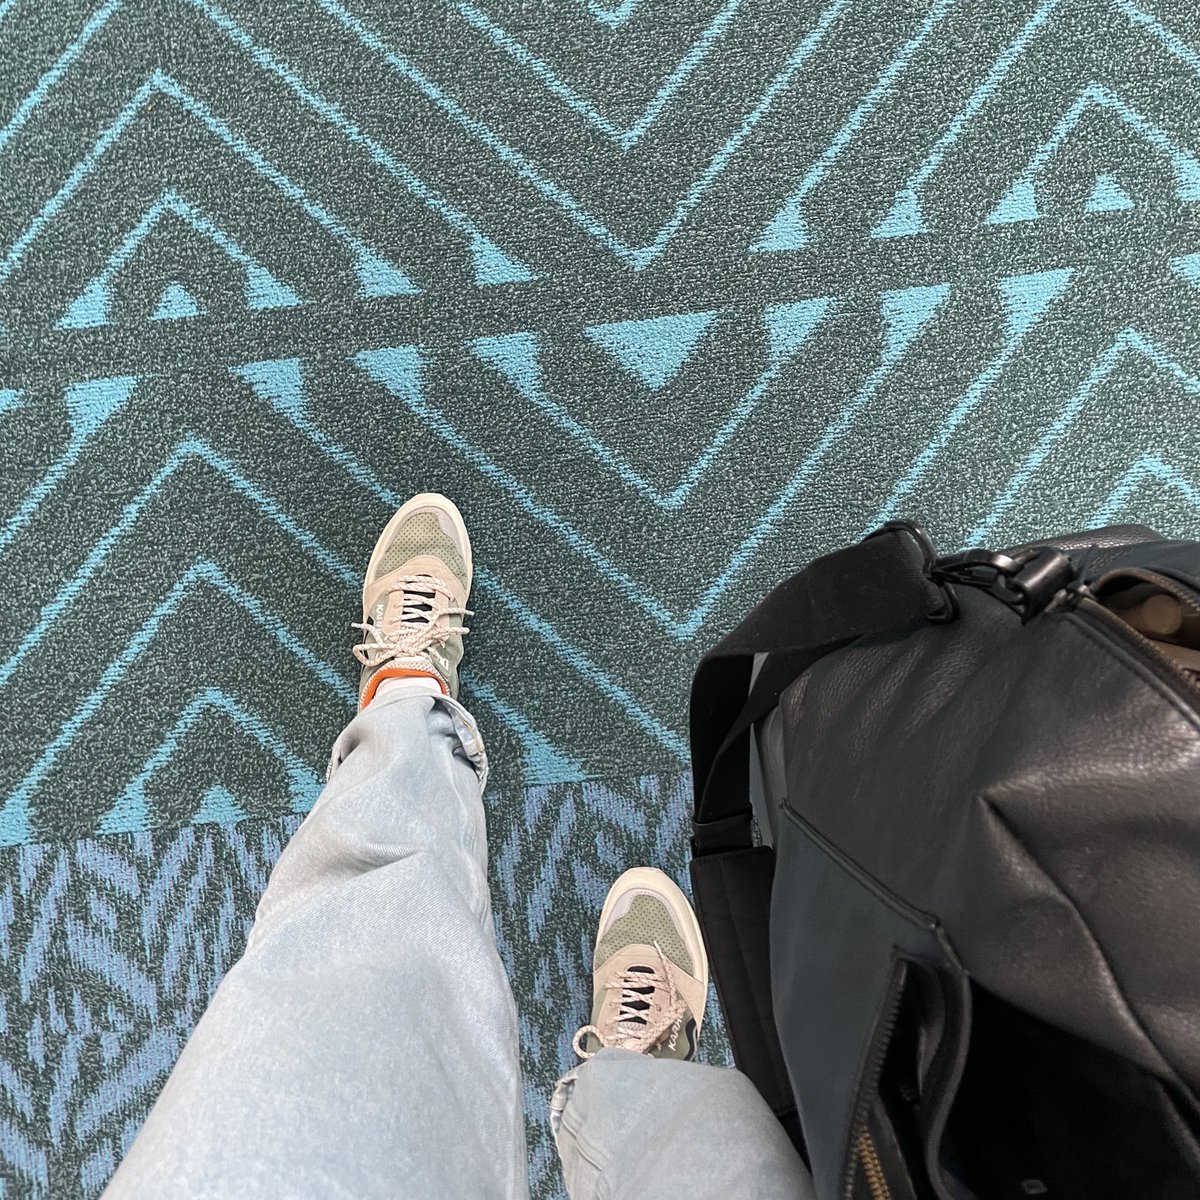 Aesthetically, I’m very on board with the carpets at YVR. But they are NOT a functional match for my pre-flight steps and make it really hard to push a suitcase around.